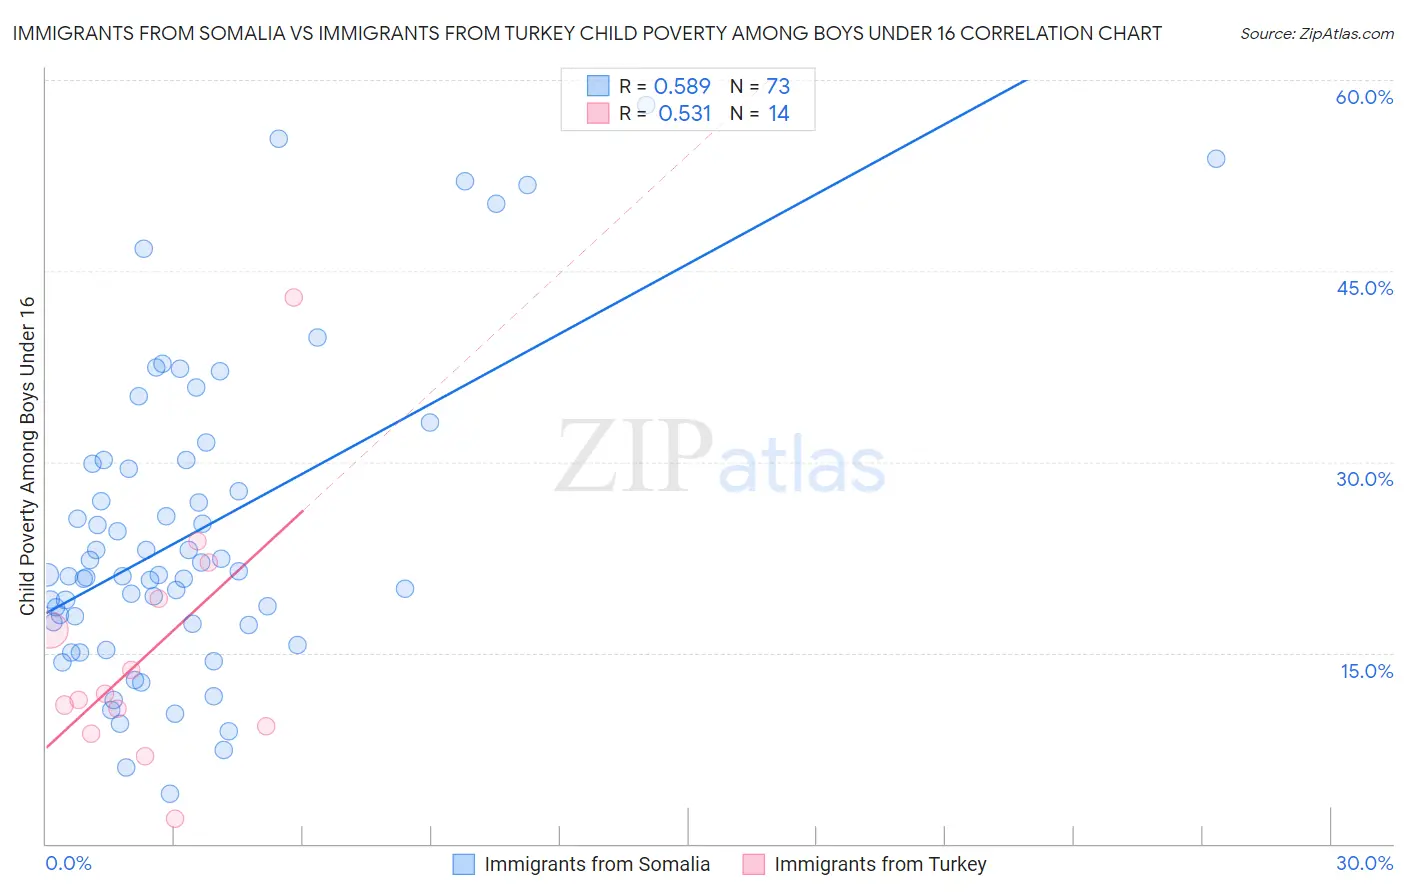 Immigrants from Somalia vs Immigrants from Turkey Child Poverty Among Boys Under 16